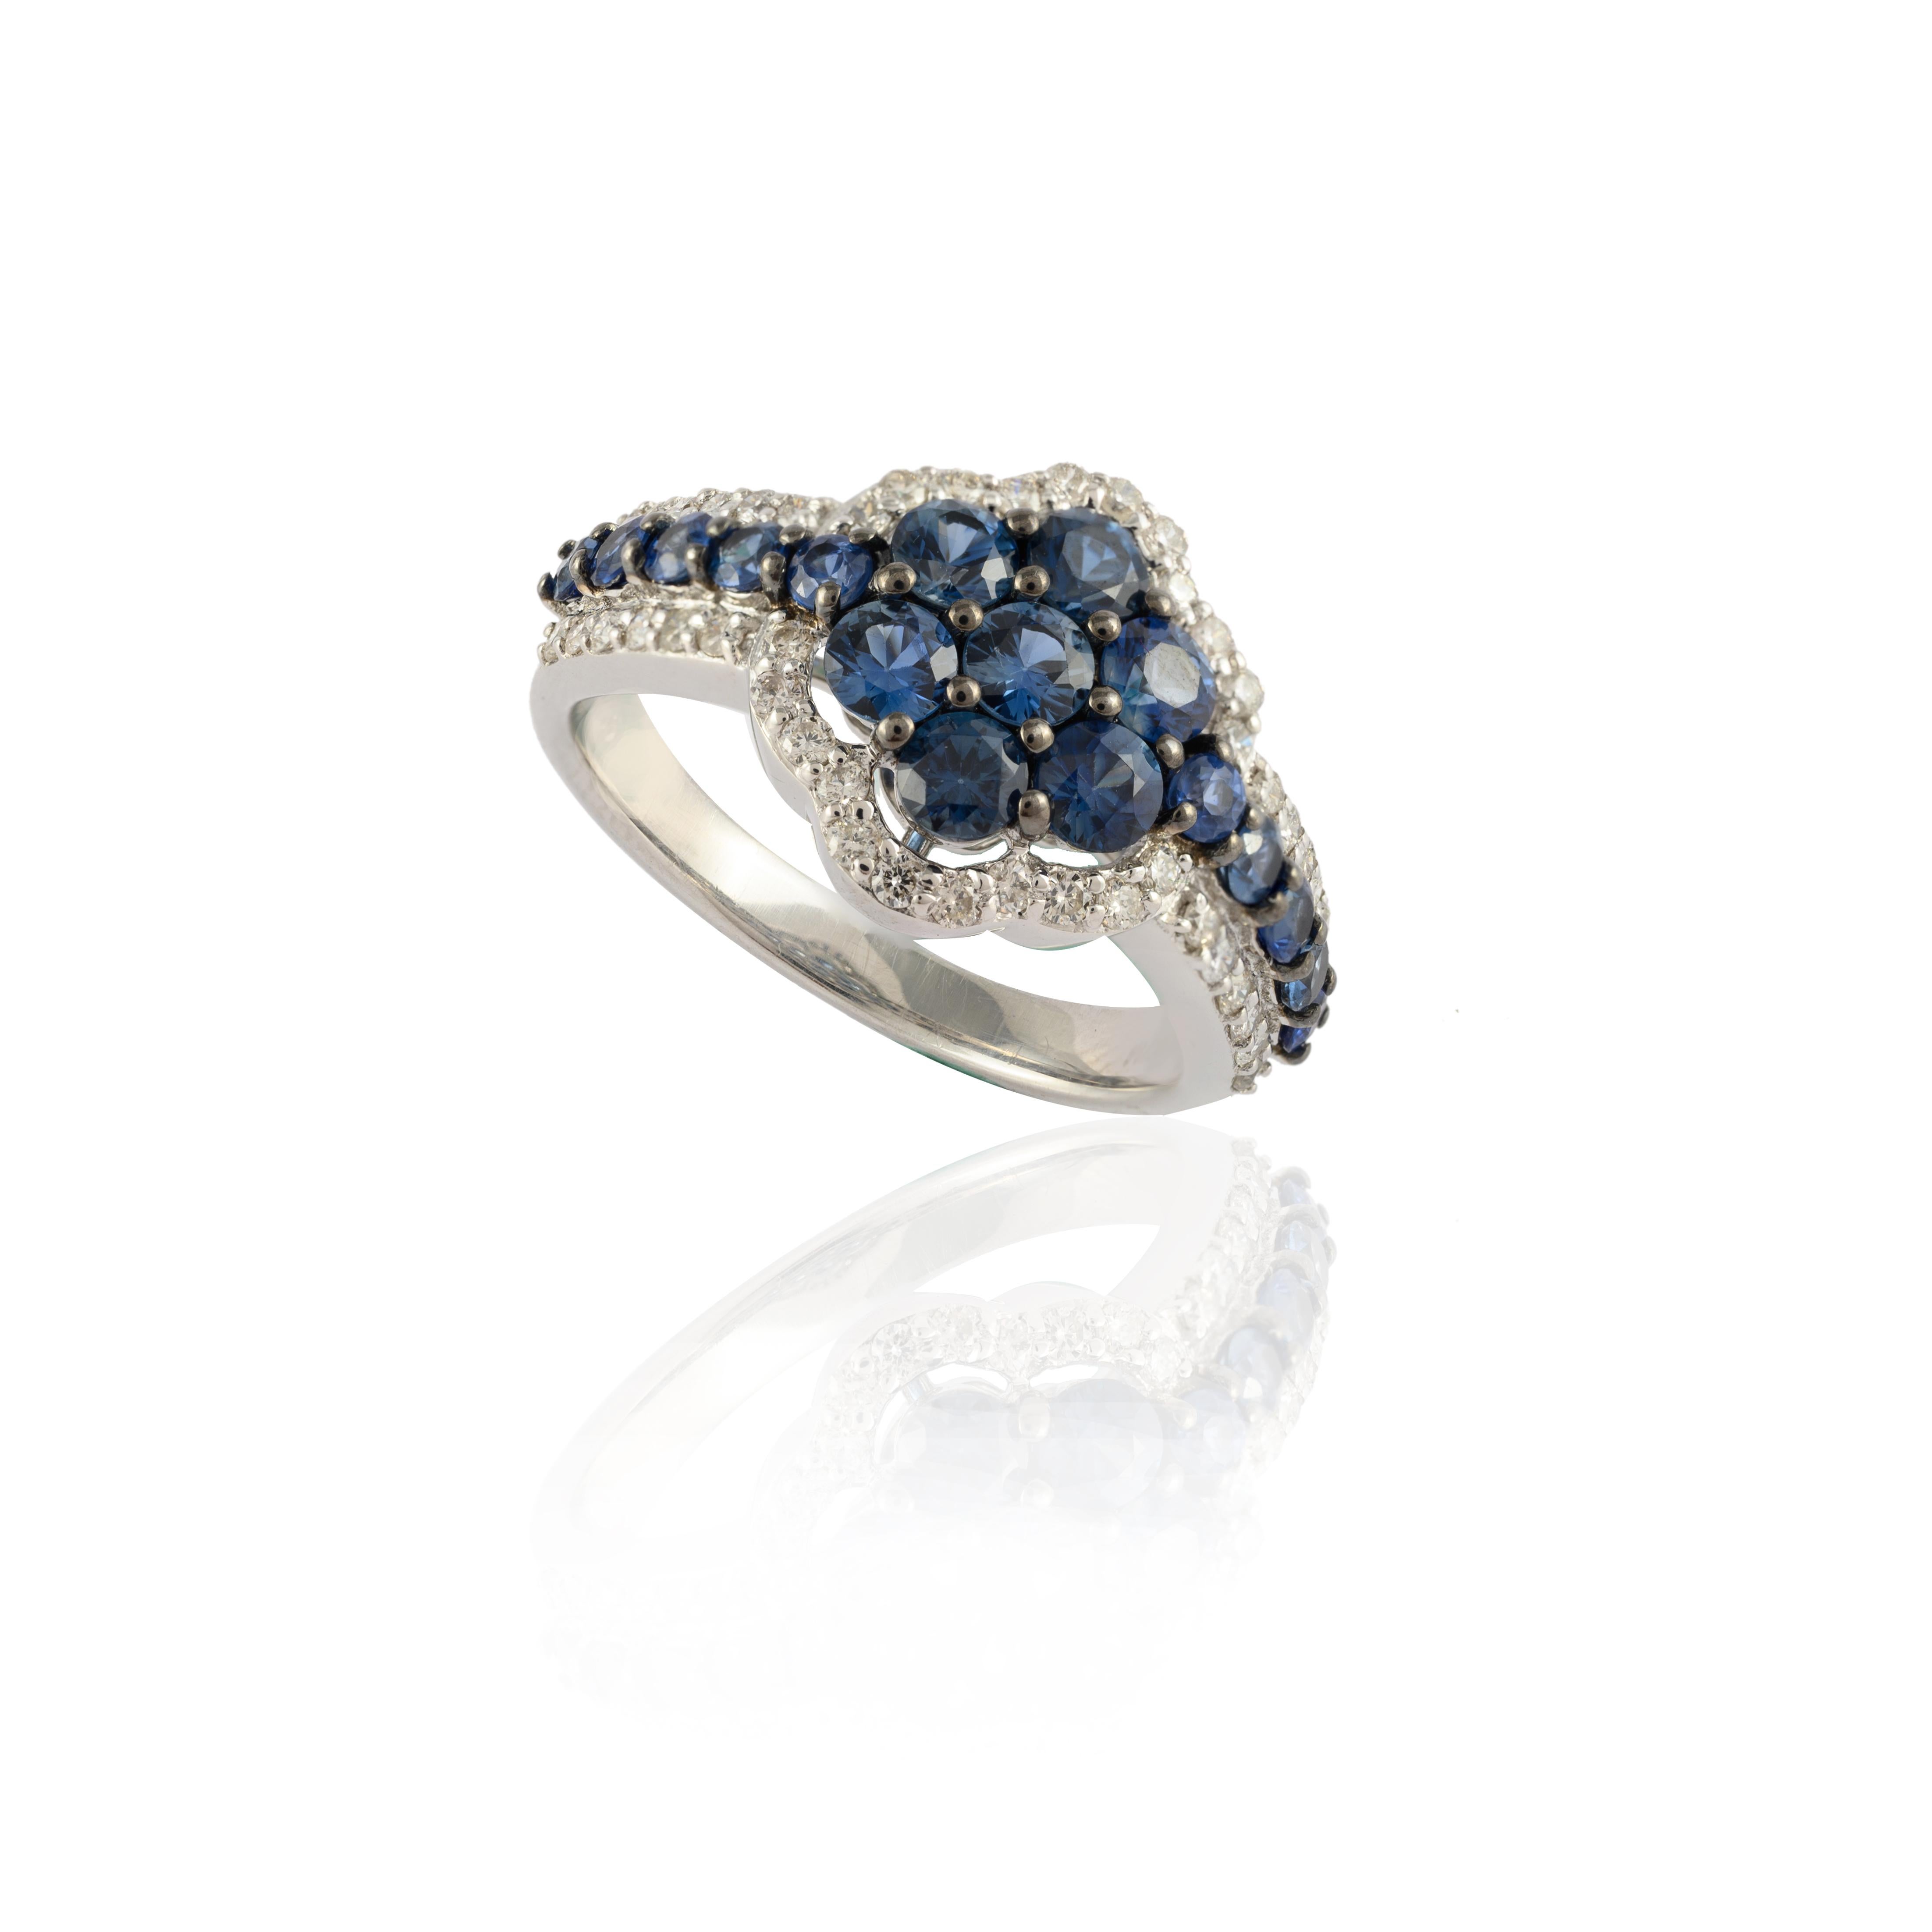 For Sale:  Unique Blue Sapphire Floral Ring with Diamonds in 14k Solid White Gold 5